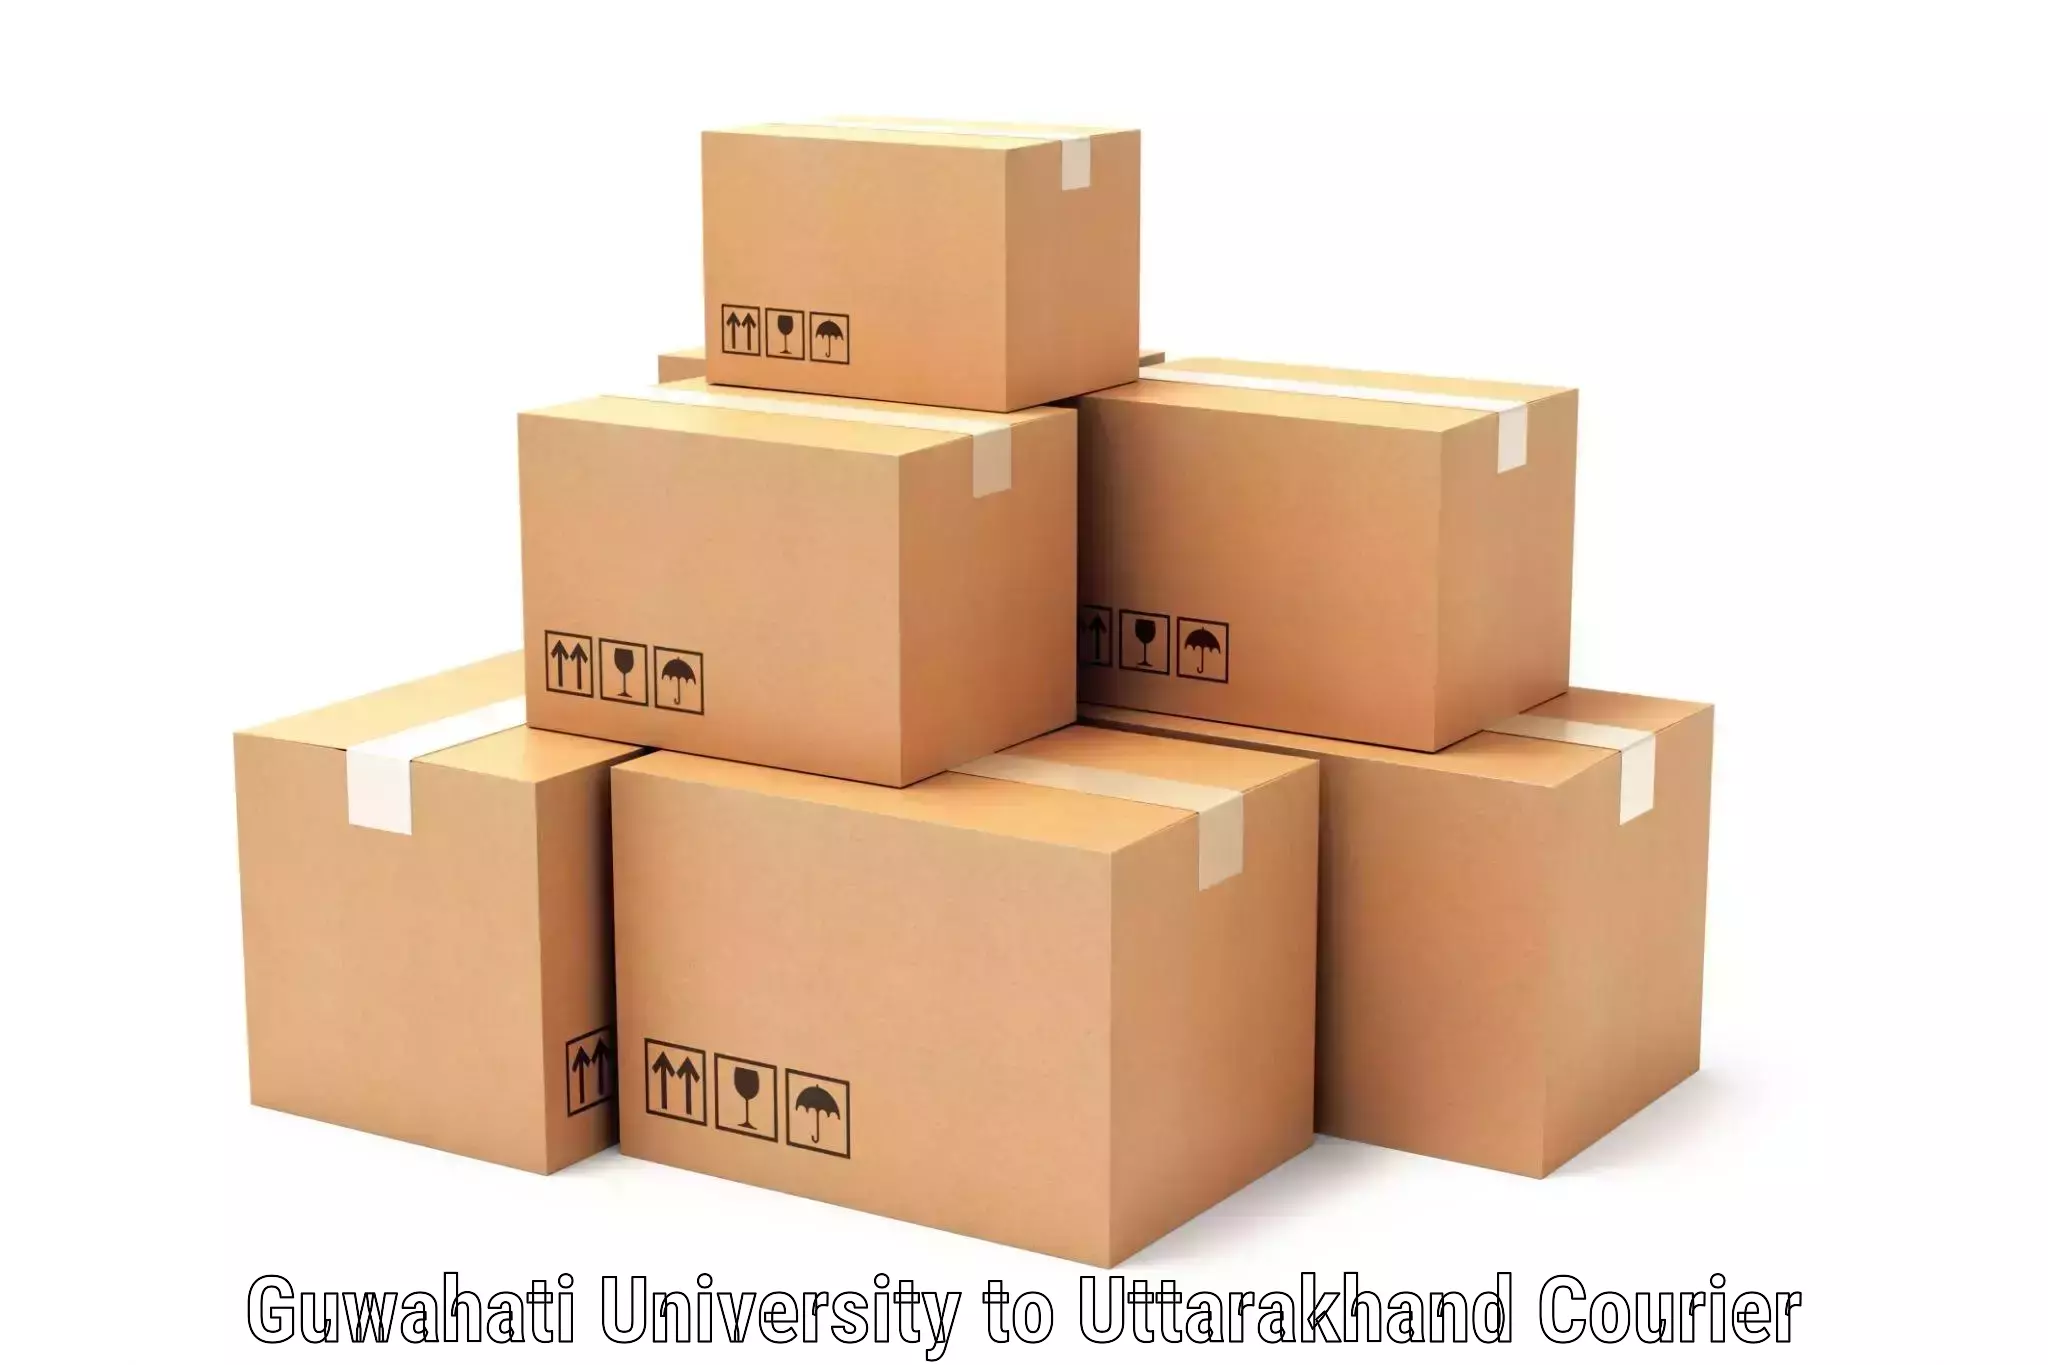 Expedited parcel delivery Guwahati University to Nainital